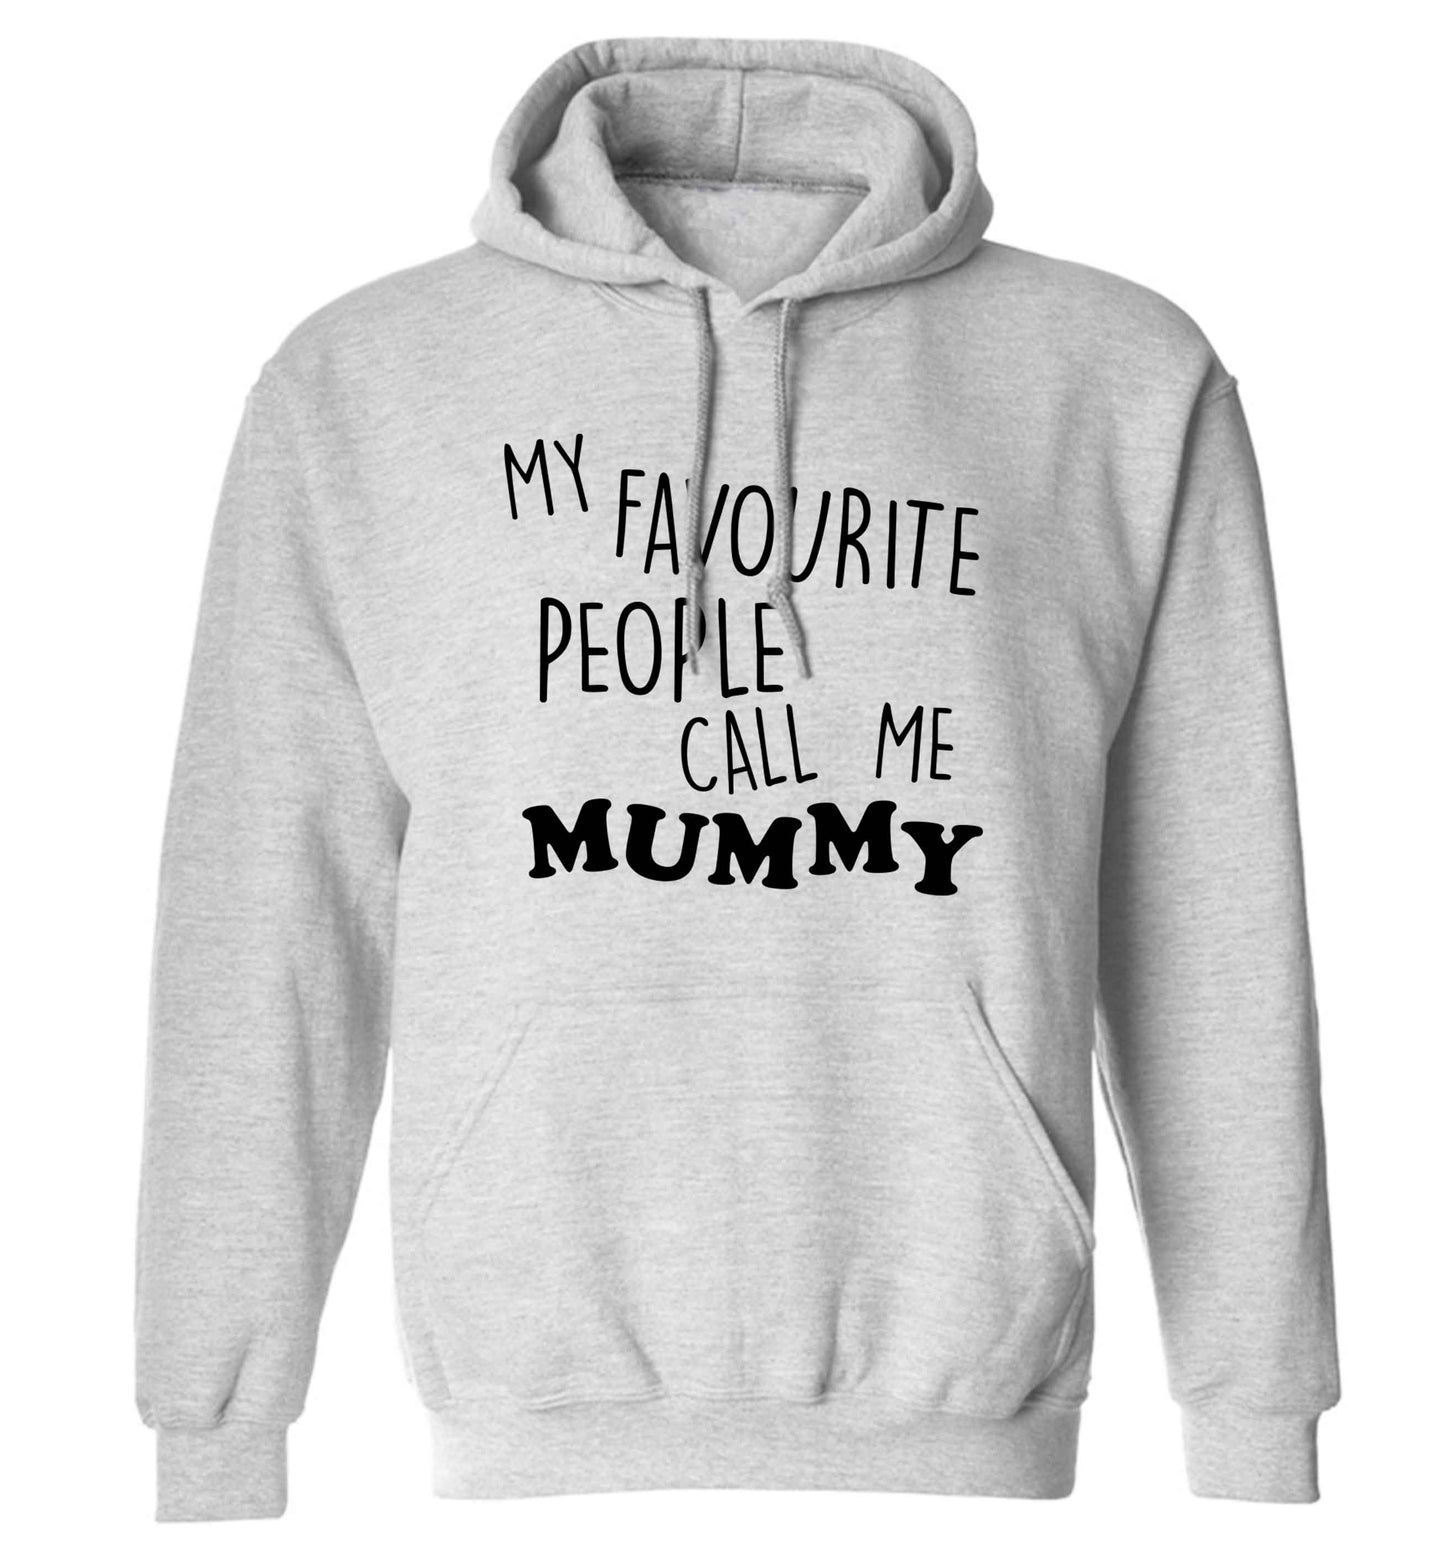 My favourite people call me mummy adults unisex grey hoodie 2XL